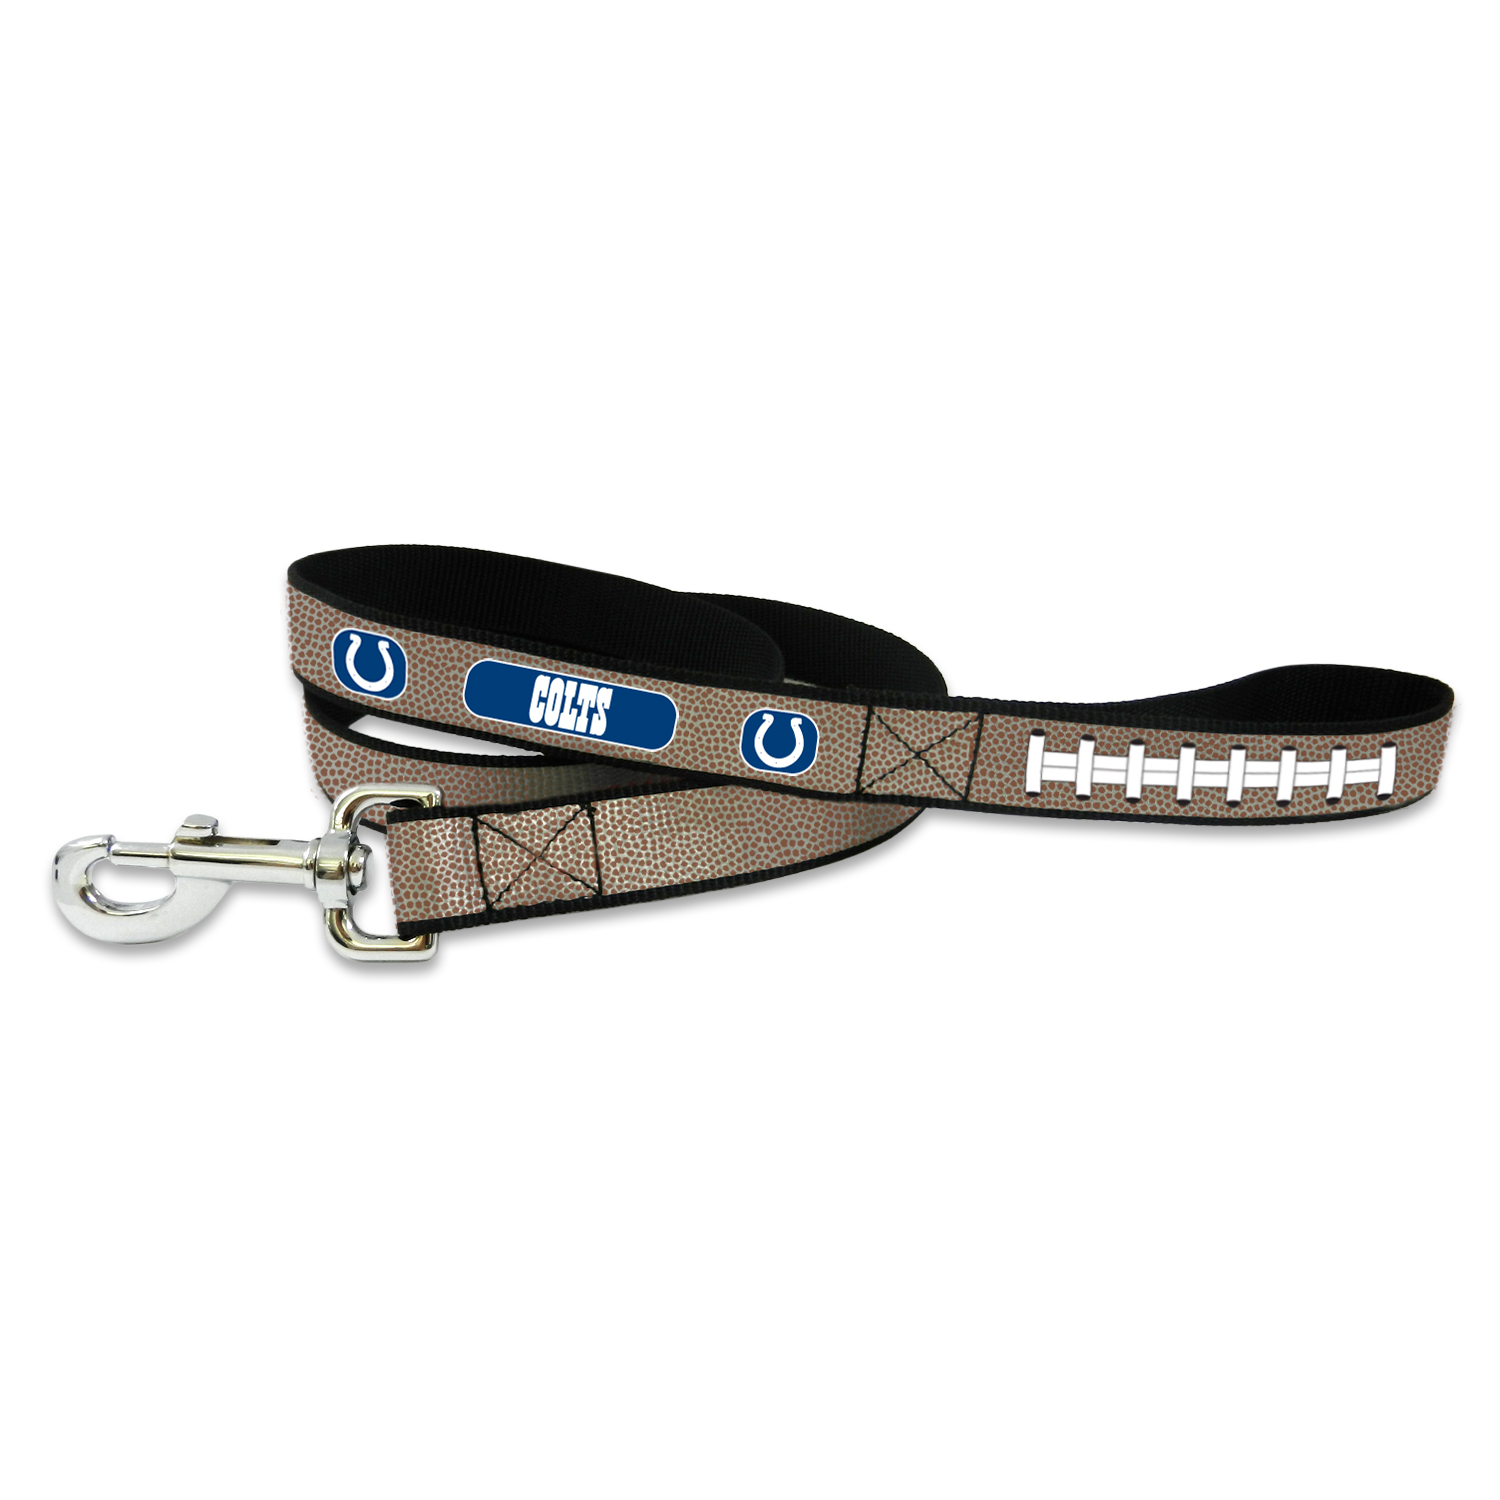 GAMEWEAR Indianapolis Colts Reflective Football Leash